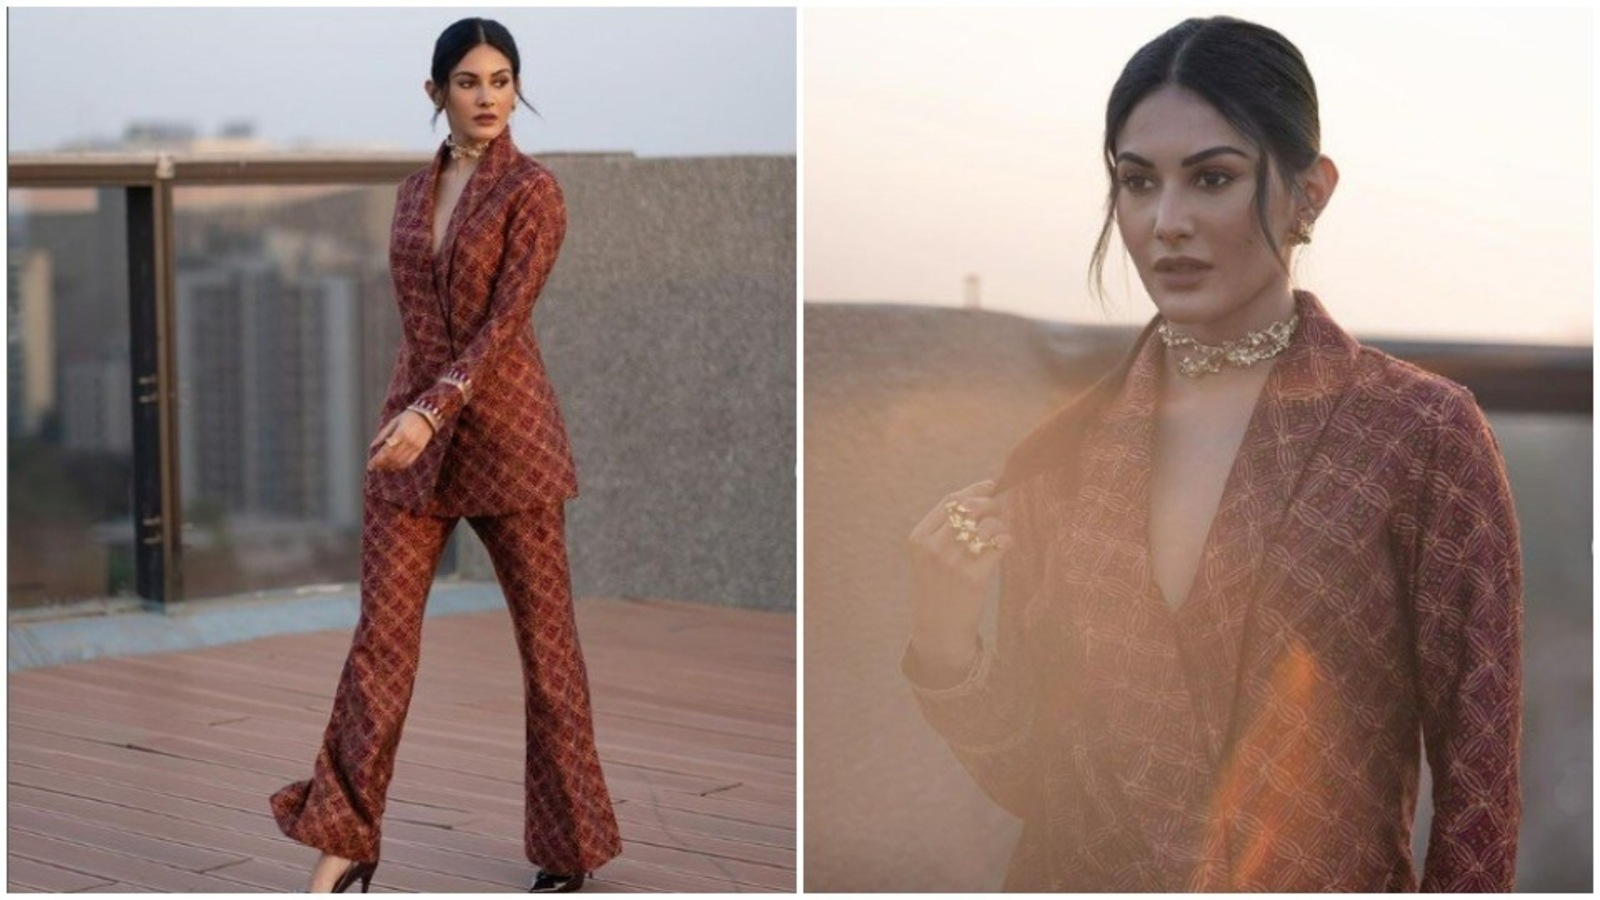 Amyra Dastur merges ‘suits and sunsets’ in recent Instagram pics